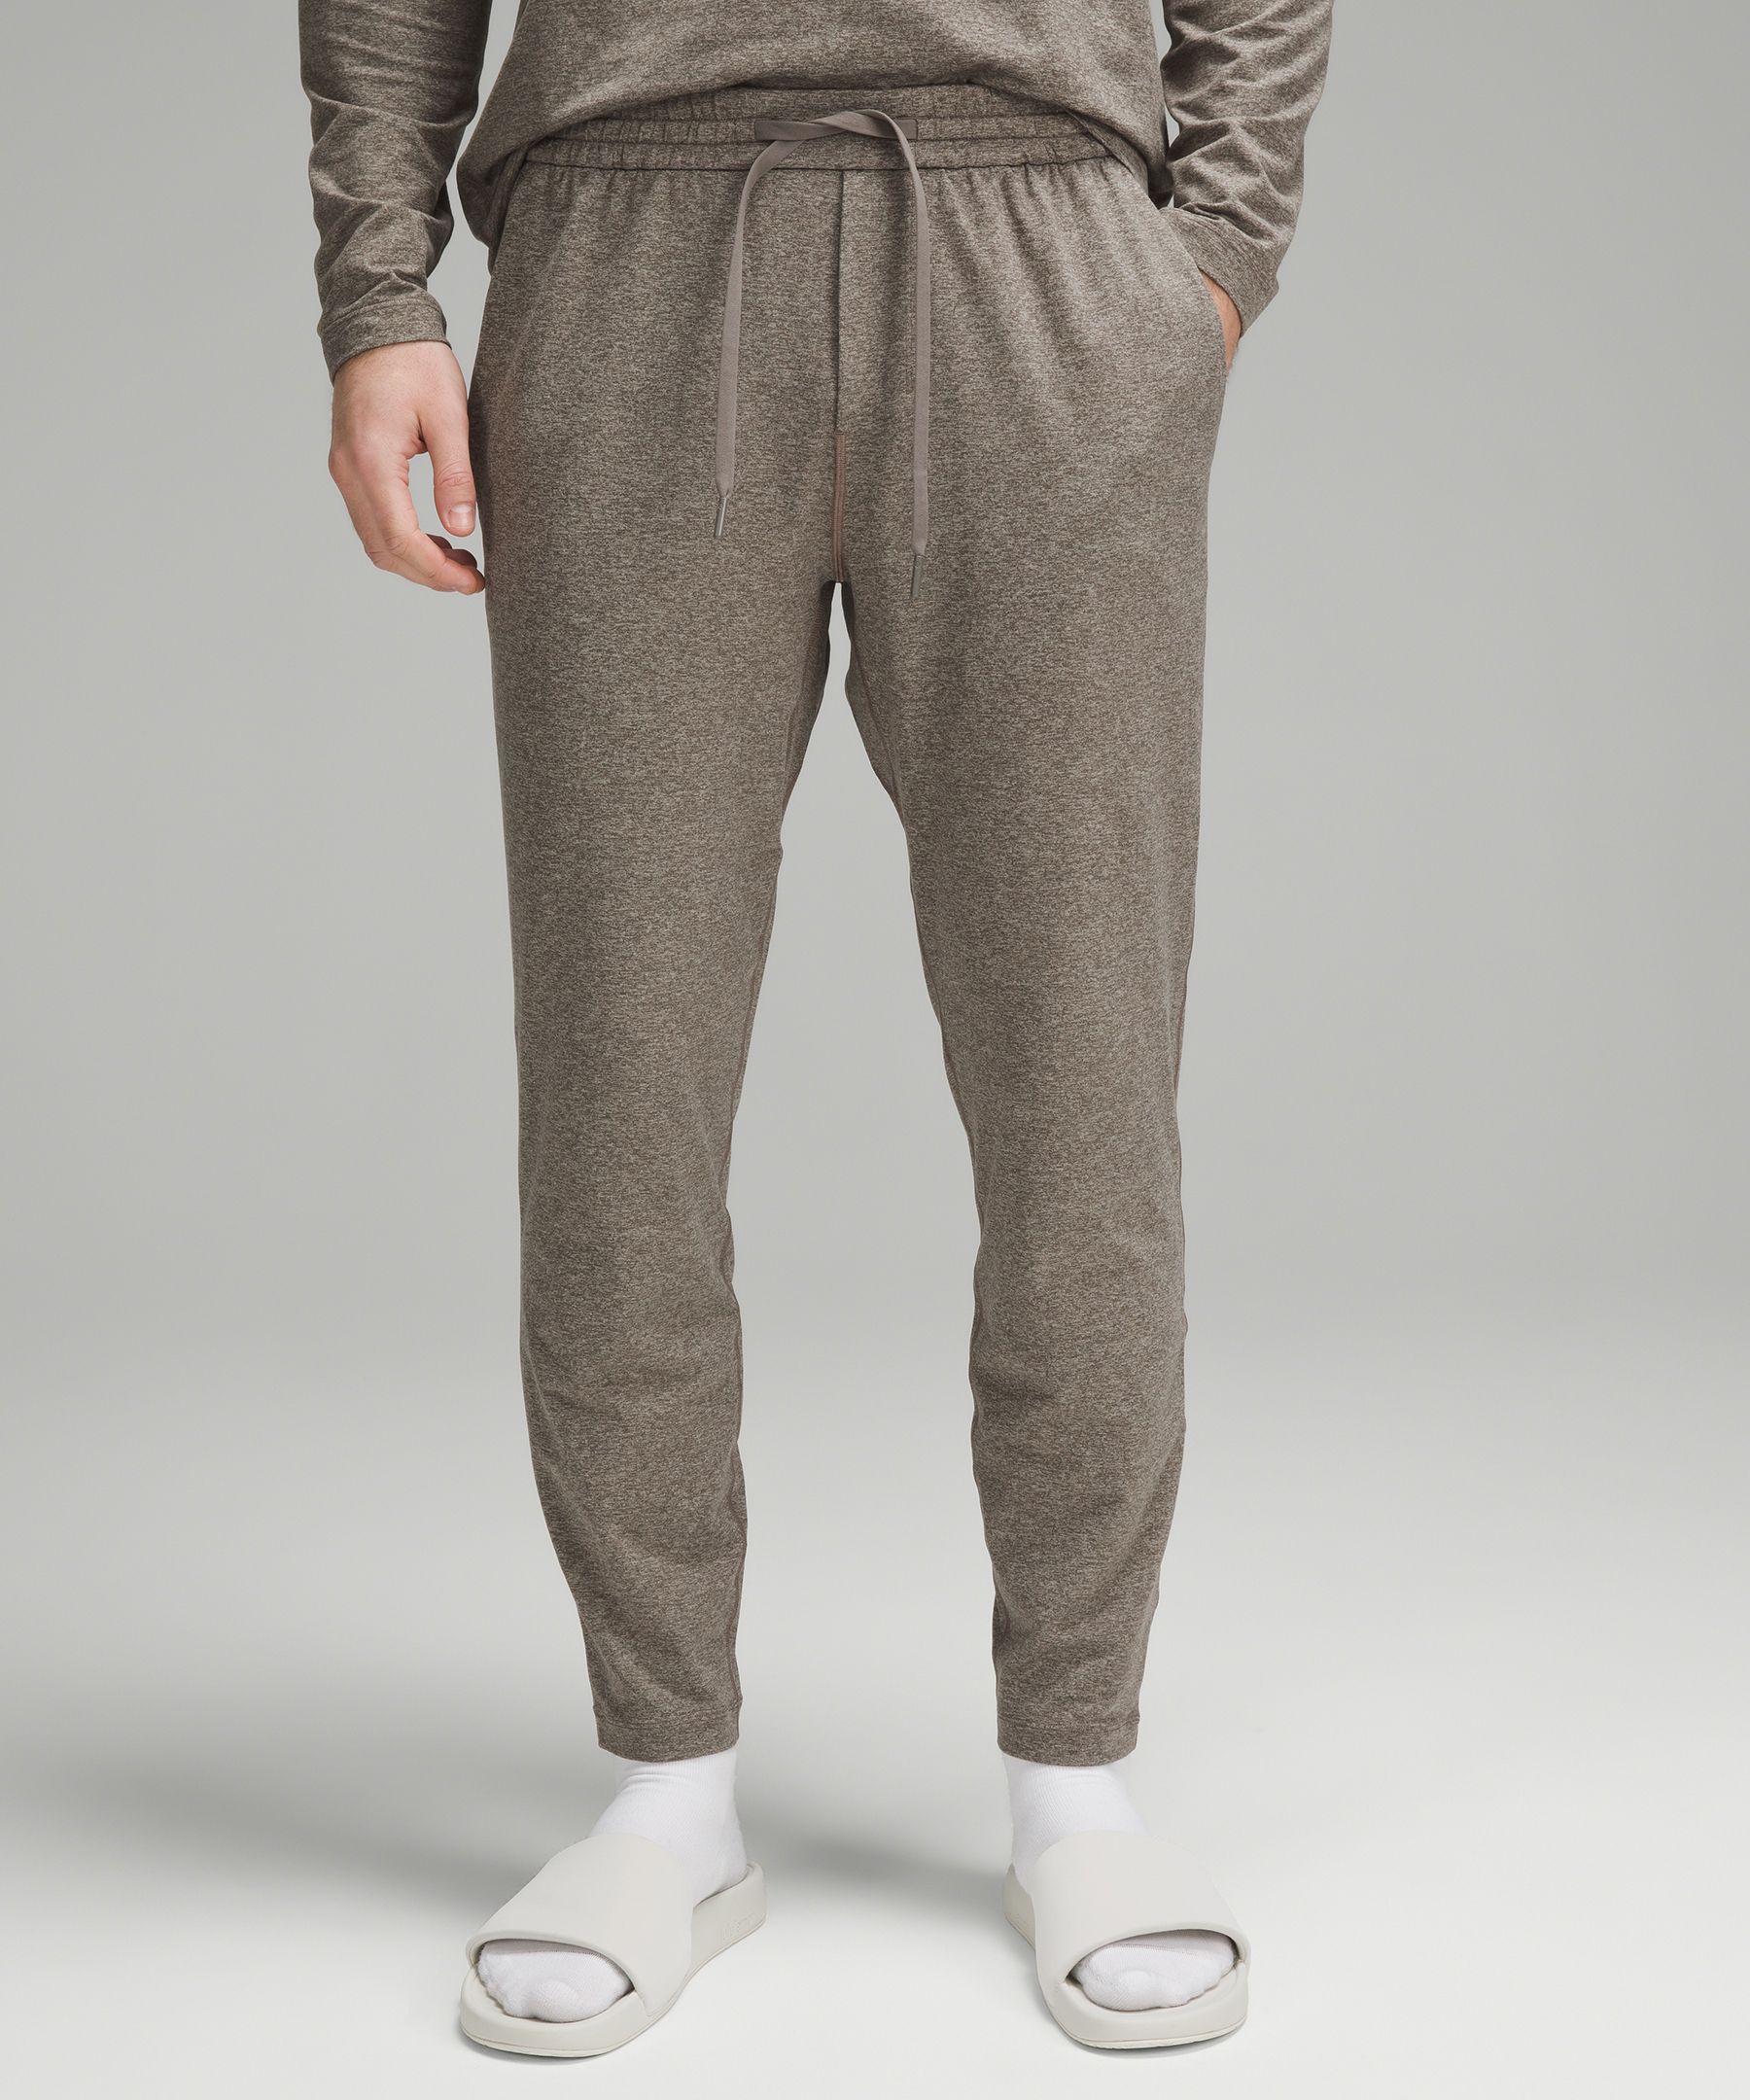 Soft Jersey Tapered Pant, Men's Joggers